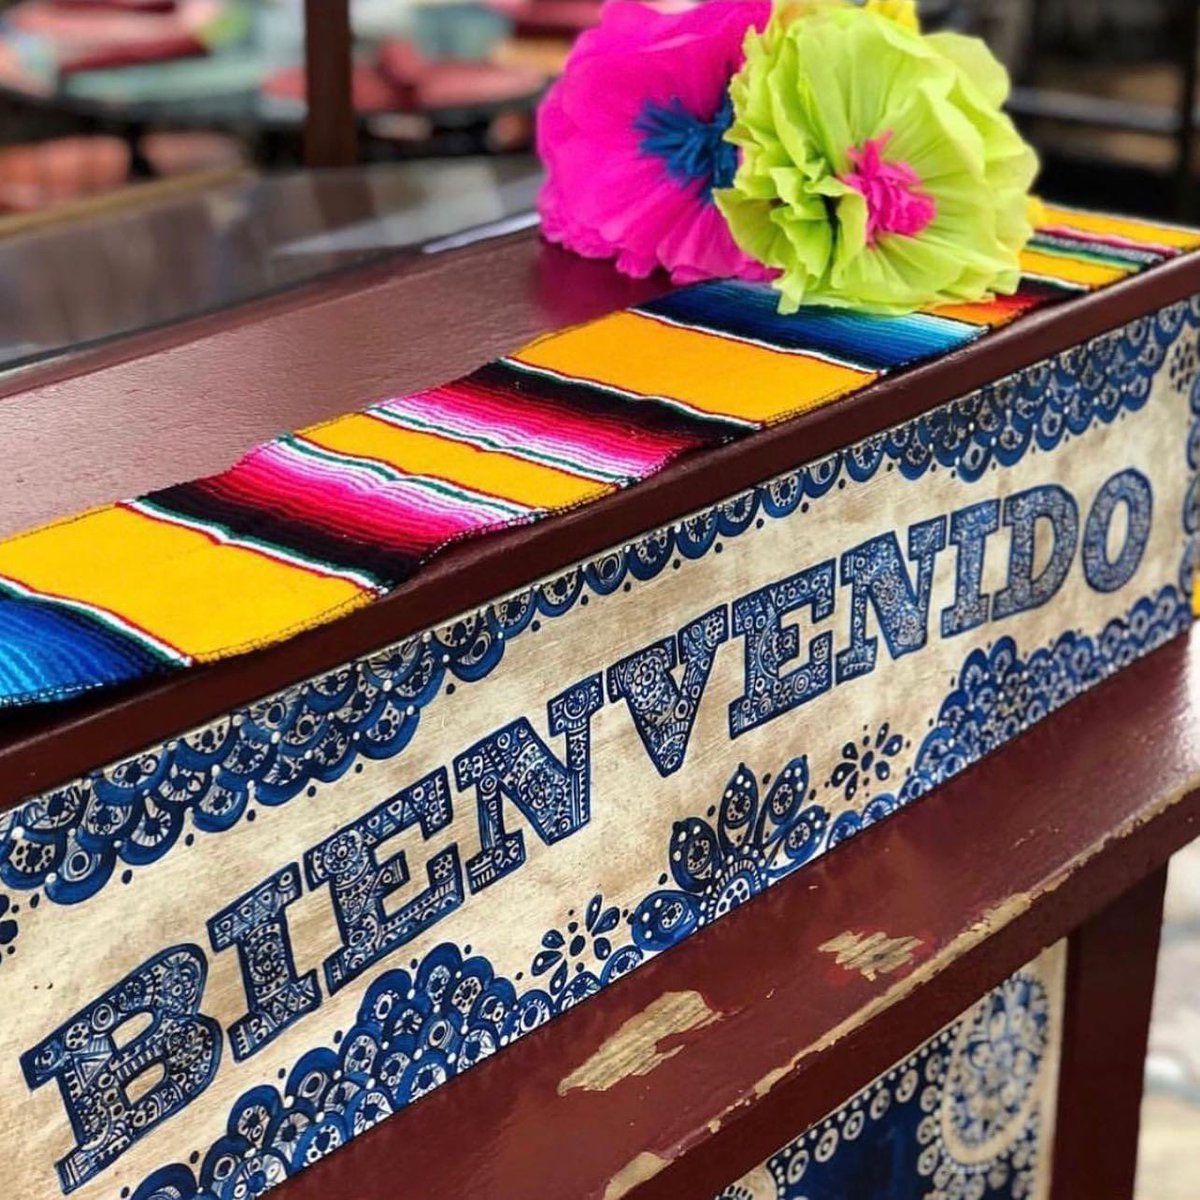 Casa de Reyes Restaurant fare trends toward traditional Mexican comfort food but with a flair that elevates each dish above the usual Mexican restaurant offerings. 

#casadereyes #sandiego #eatsandiego #oldtownsandiego